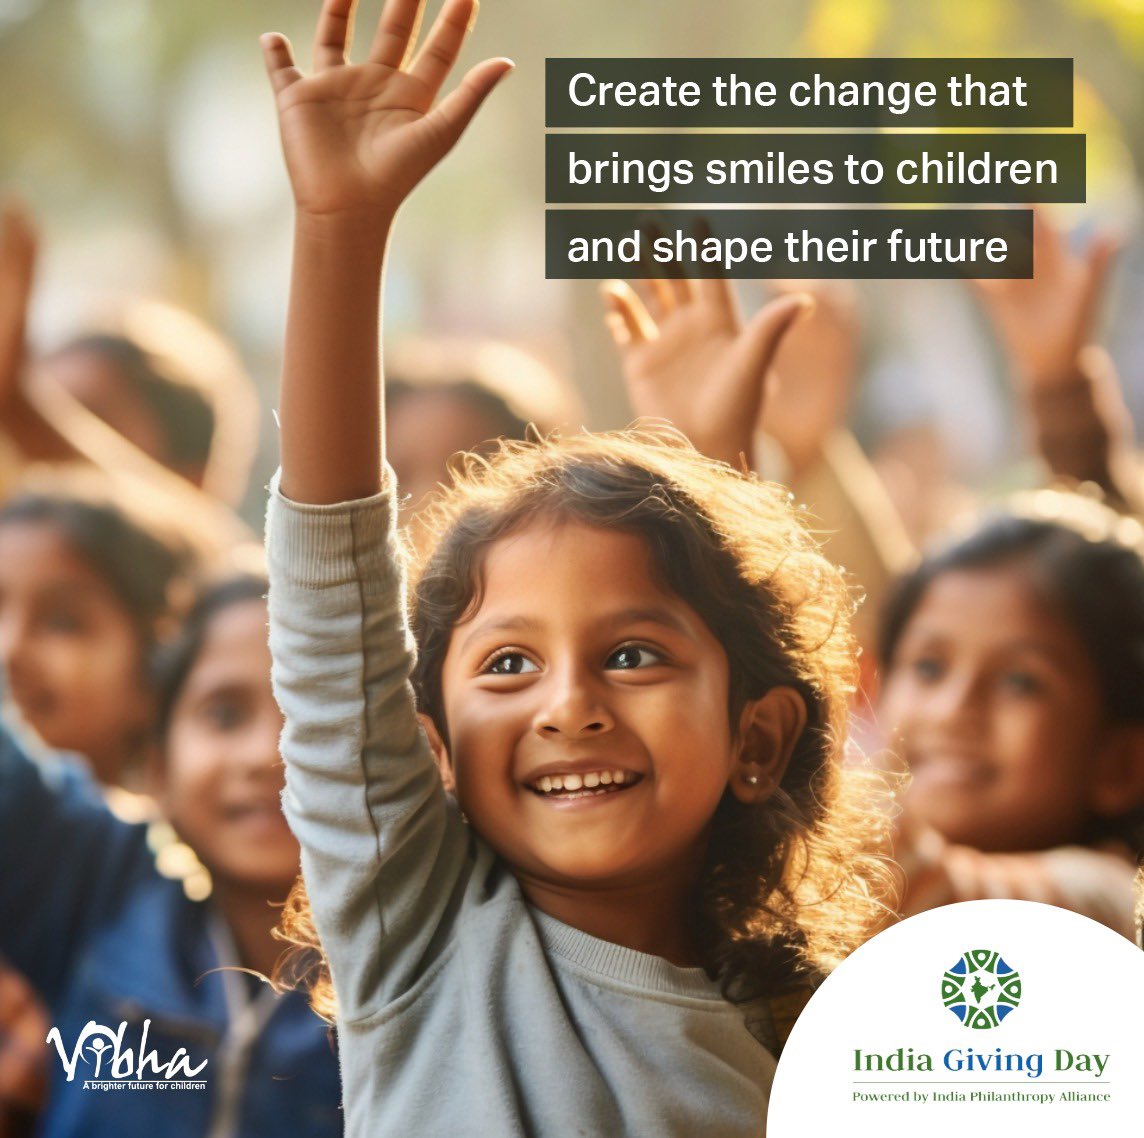 🇮🇳Join Vibha in our commitment to raising funds for India’s underprivileged children.

👏🏼 This India Giving Day presents an excellent opportunity to contribute towards the education of these children. Log on to indiagivingday.org/organizations/… NOW!

#vibha #vibhango #indiagivingday #india